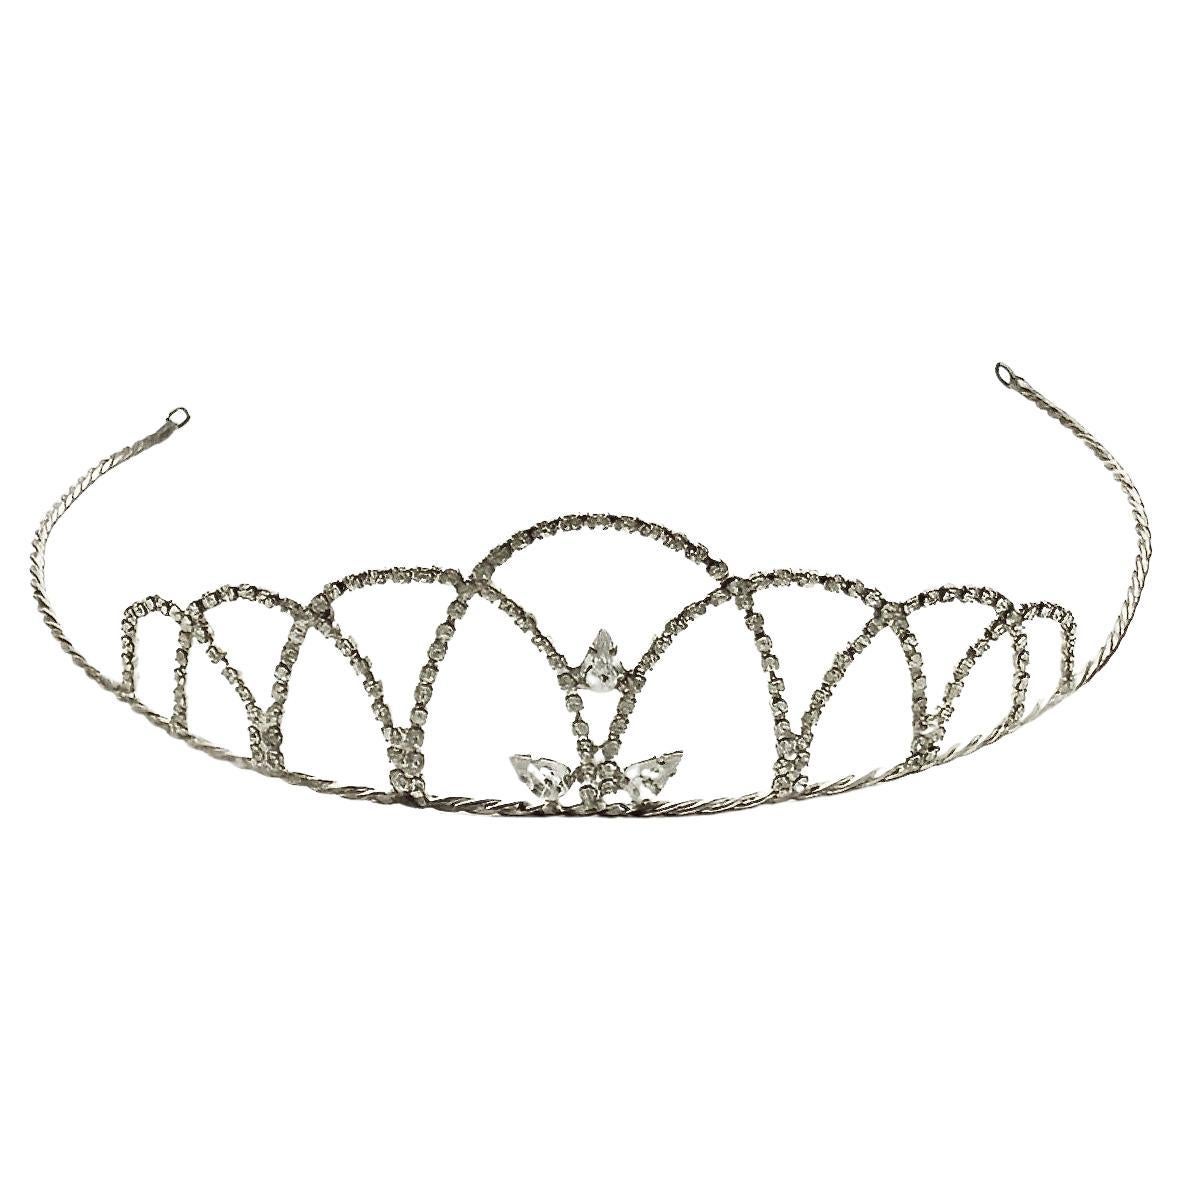 Silver Plated Tiara with a Rope Twist Band and Faceted Rhinestones circa 1960s